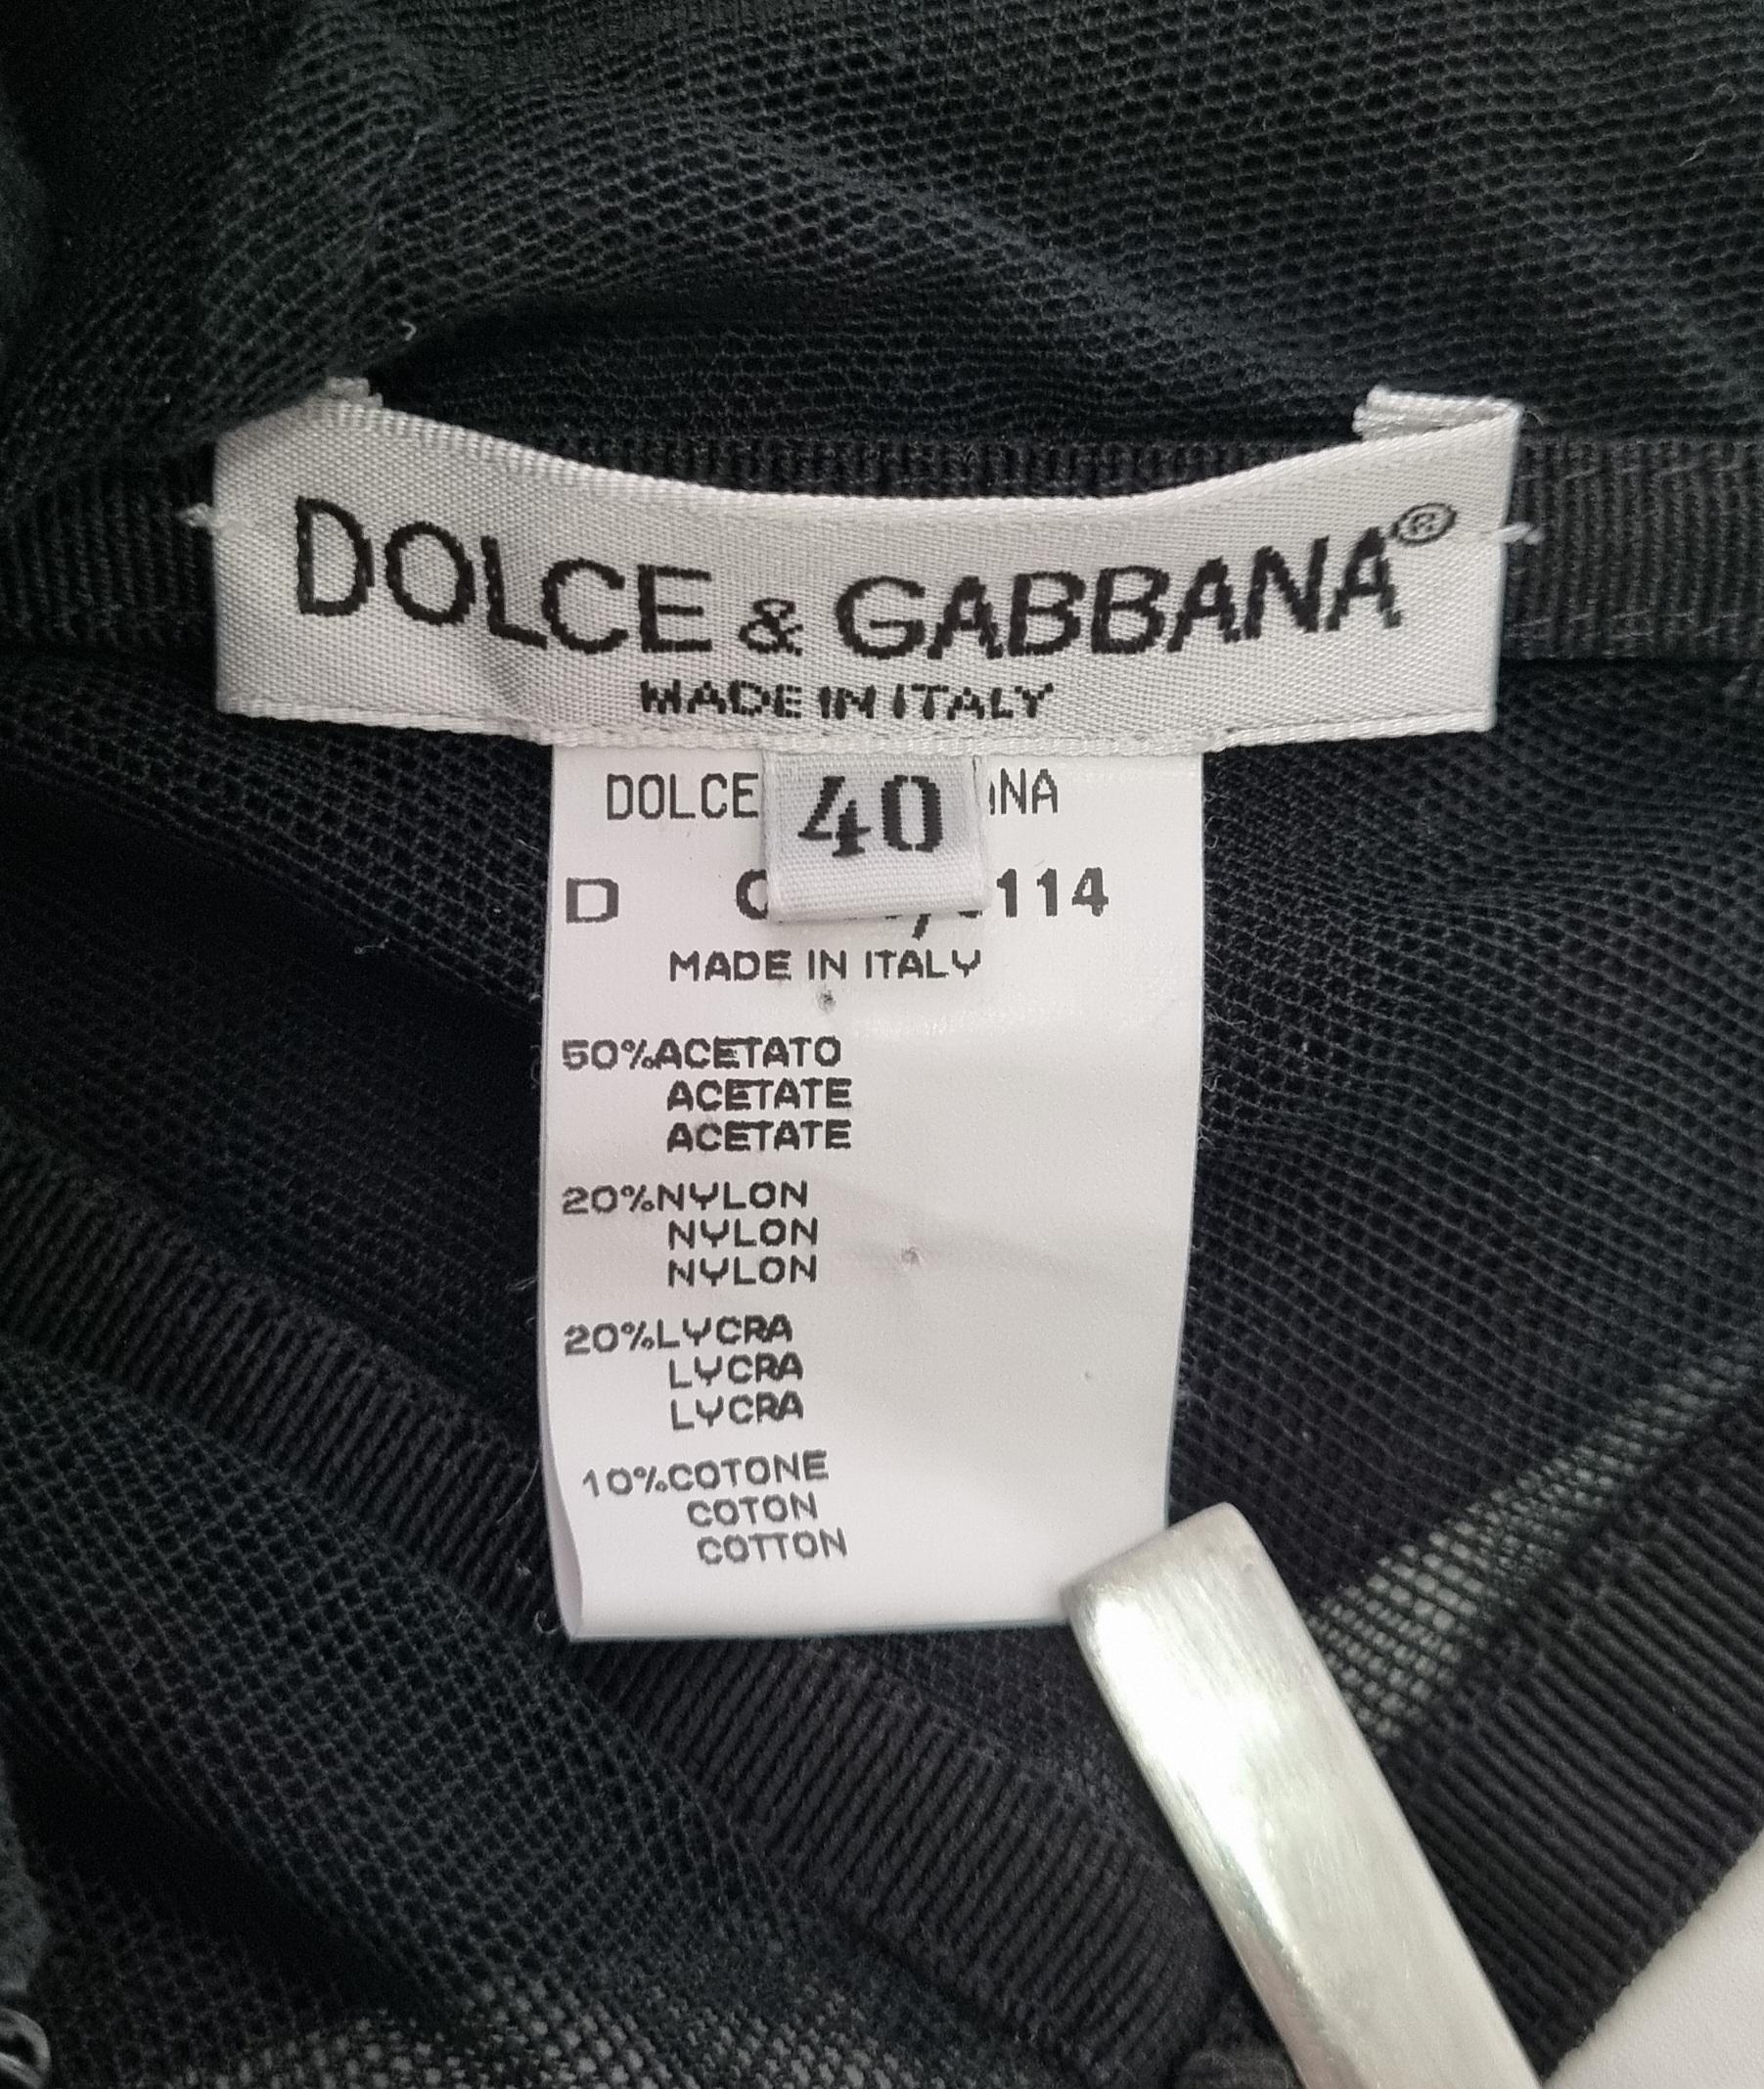 Inbuilt corseted dress from Dolce and Gabbanas iconic 'Stromboli collection' with a butterfly applique.

Size: Italian 40. Fits like a XS to S

Material: Acetate, Nylon, lycra and cotton 

Condition: Very Good